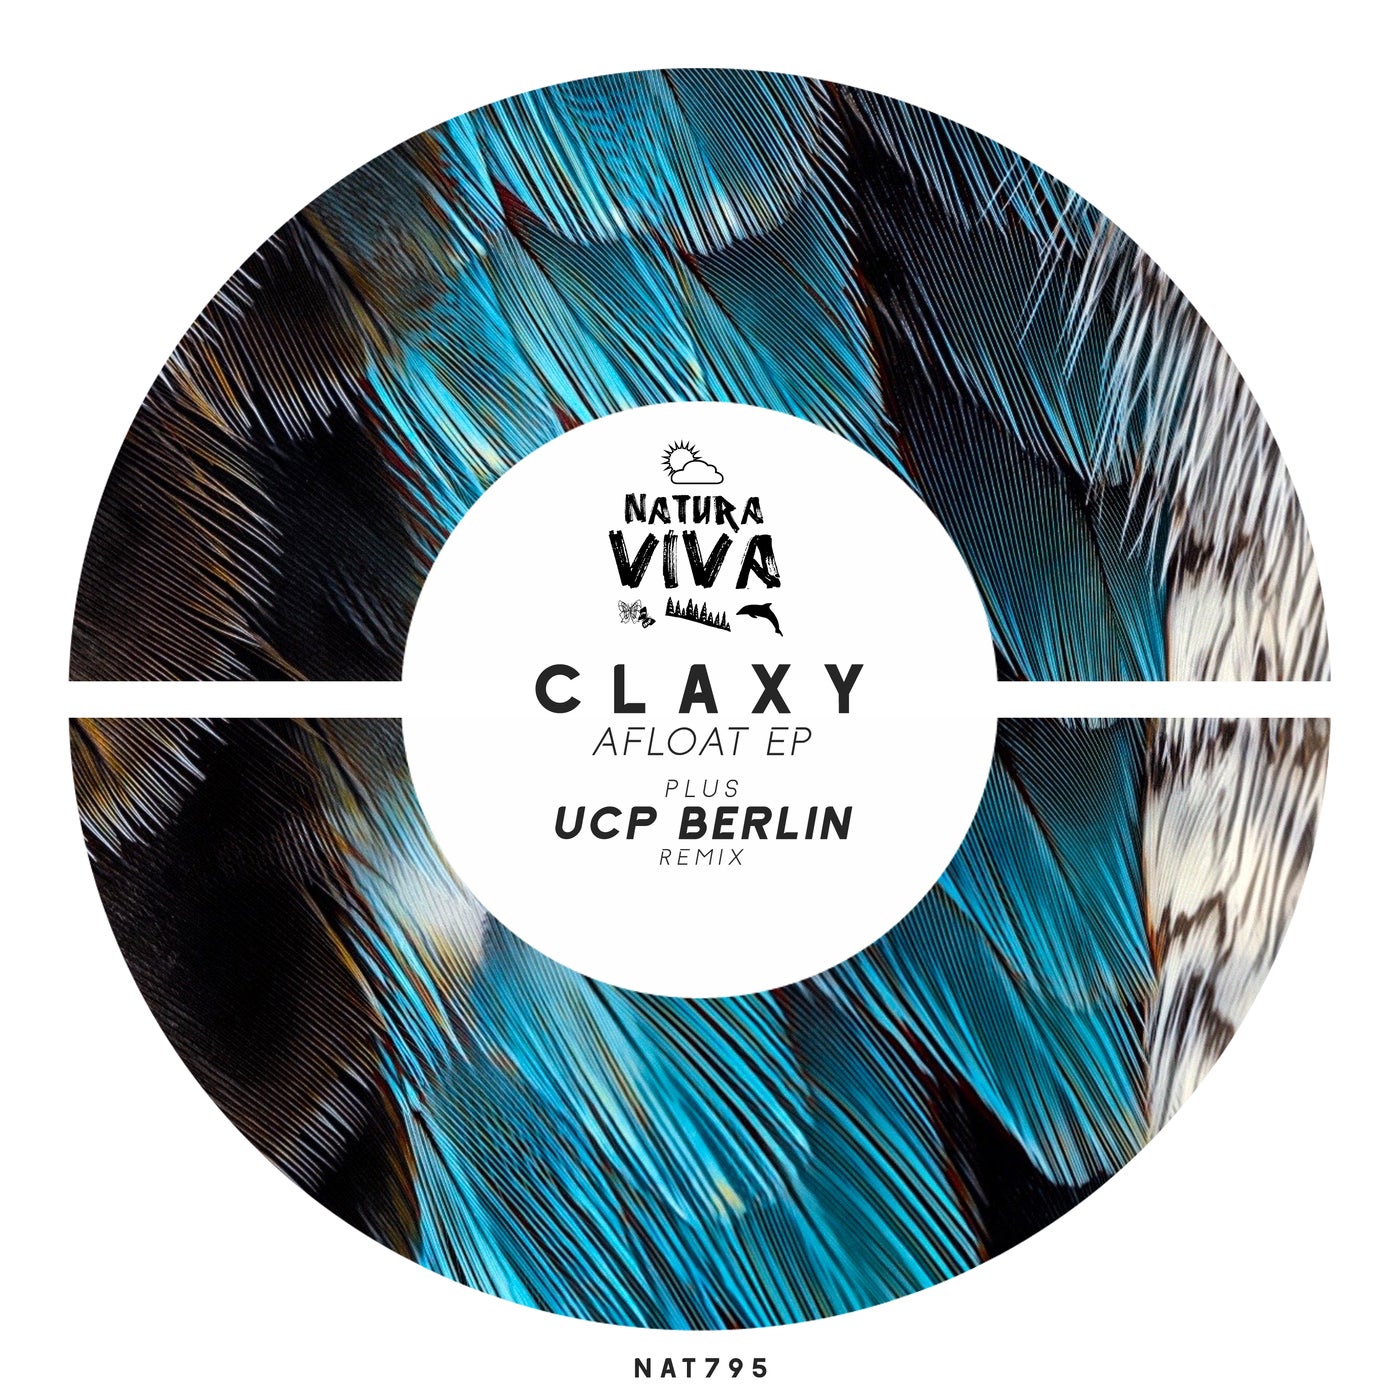 Claxy – Afloat Ep [NAT795]